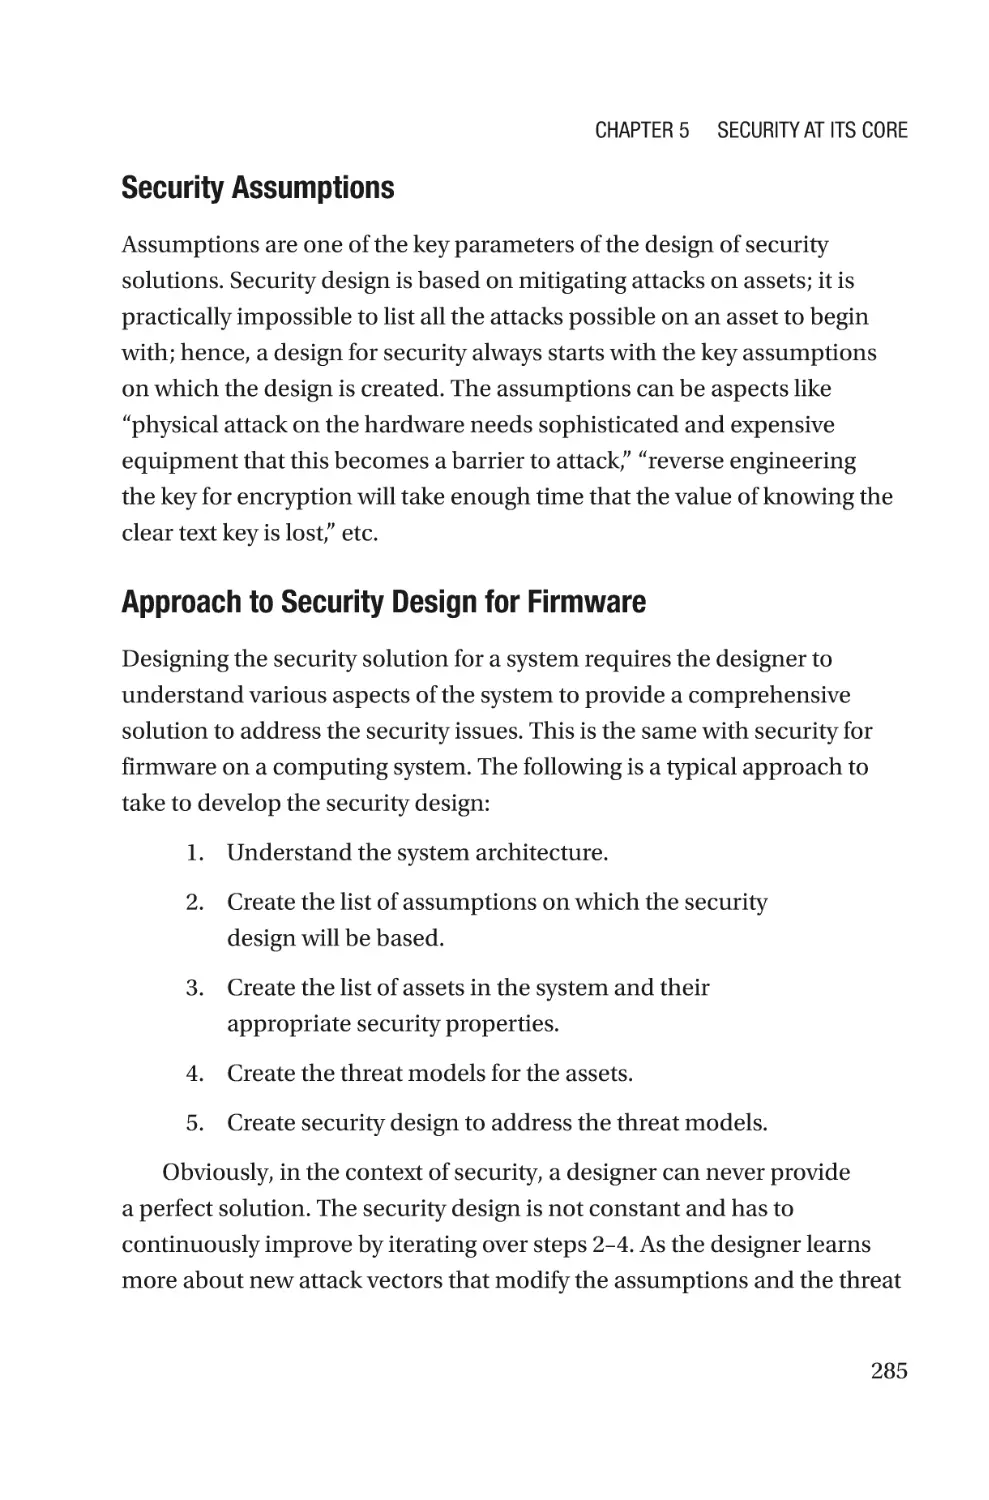 Security Assumptions
Approach to Security Design for Firmware